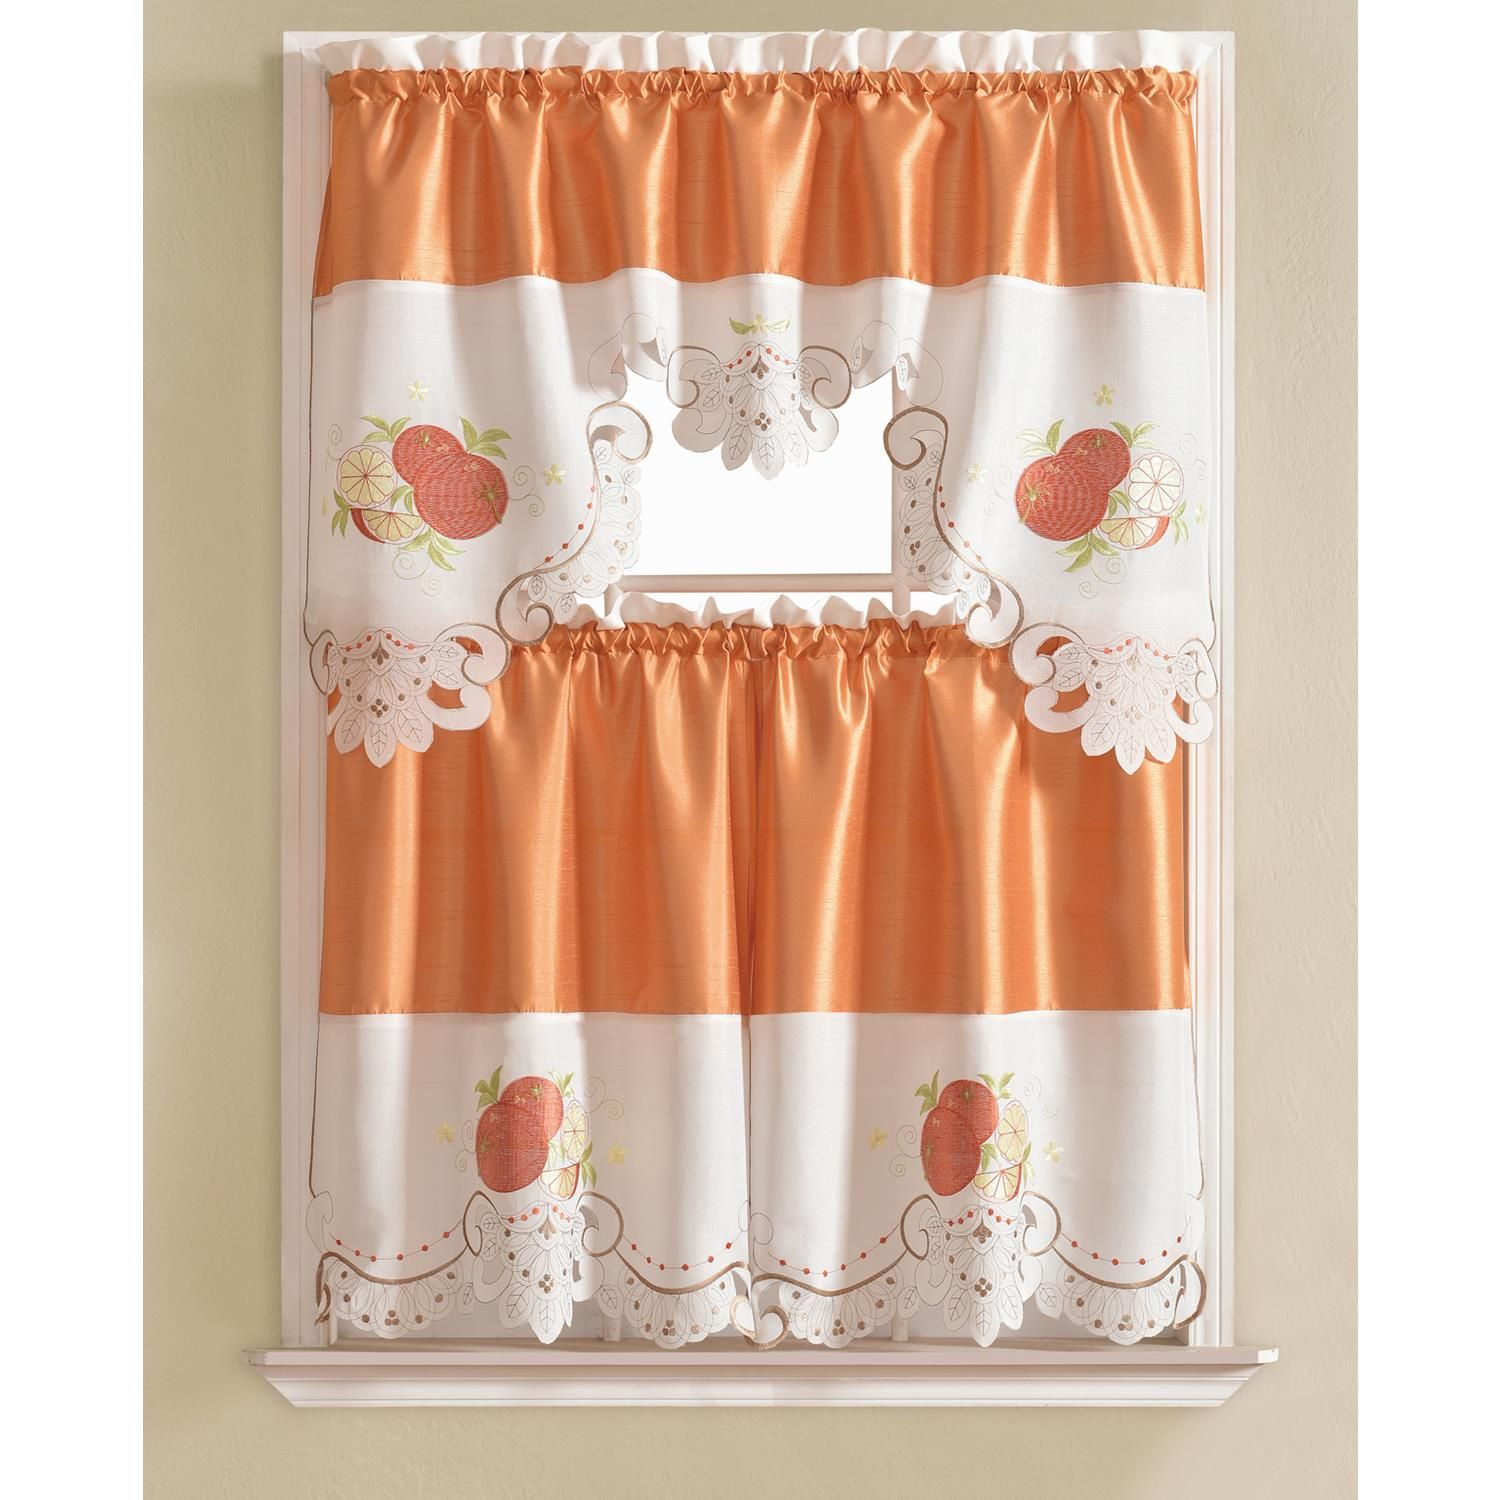 Details About Noble Embroidered Orange Tier And Valance Kitchen Curtain Set In Lodge Plaid 3 Piece Kitchen Curtain Tier And Valance Sets (Photo 19 of 20)